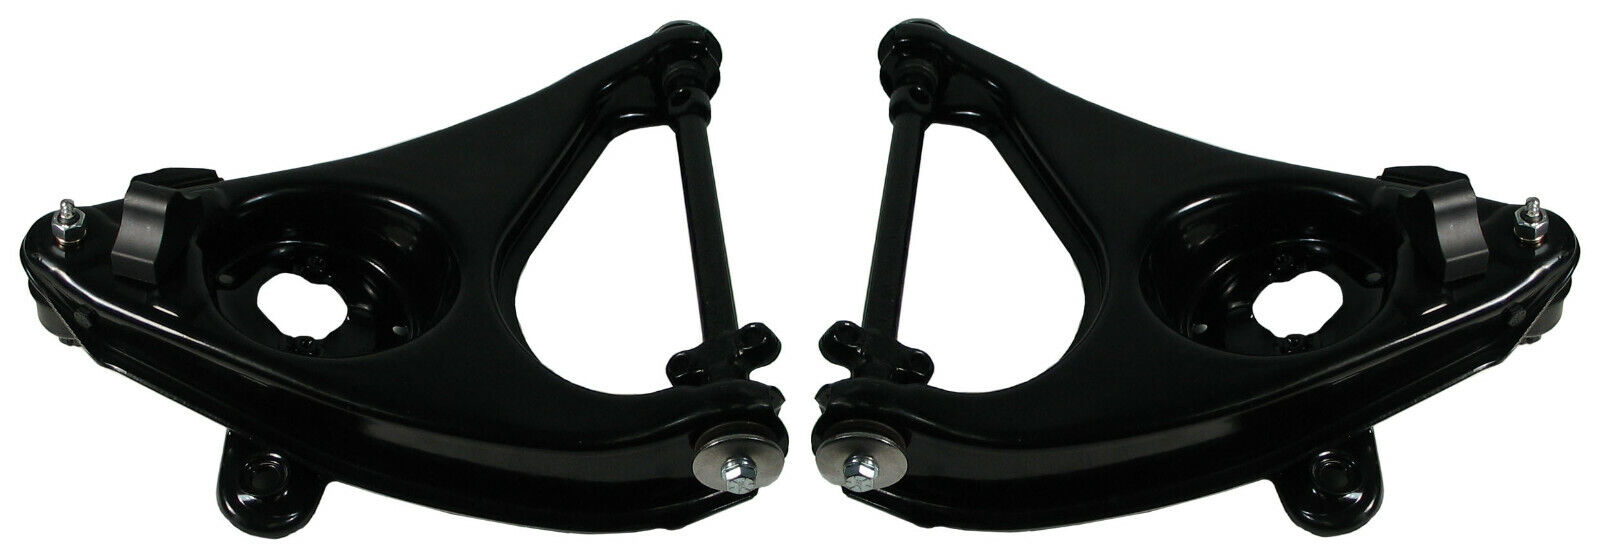 NEW STOCK LOWER CONTROL ARMS,A-ARMS,W/ SHAFTS,BALL JOINTS,58-64 IMPALA,BEL AIR